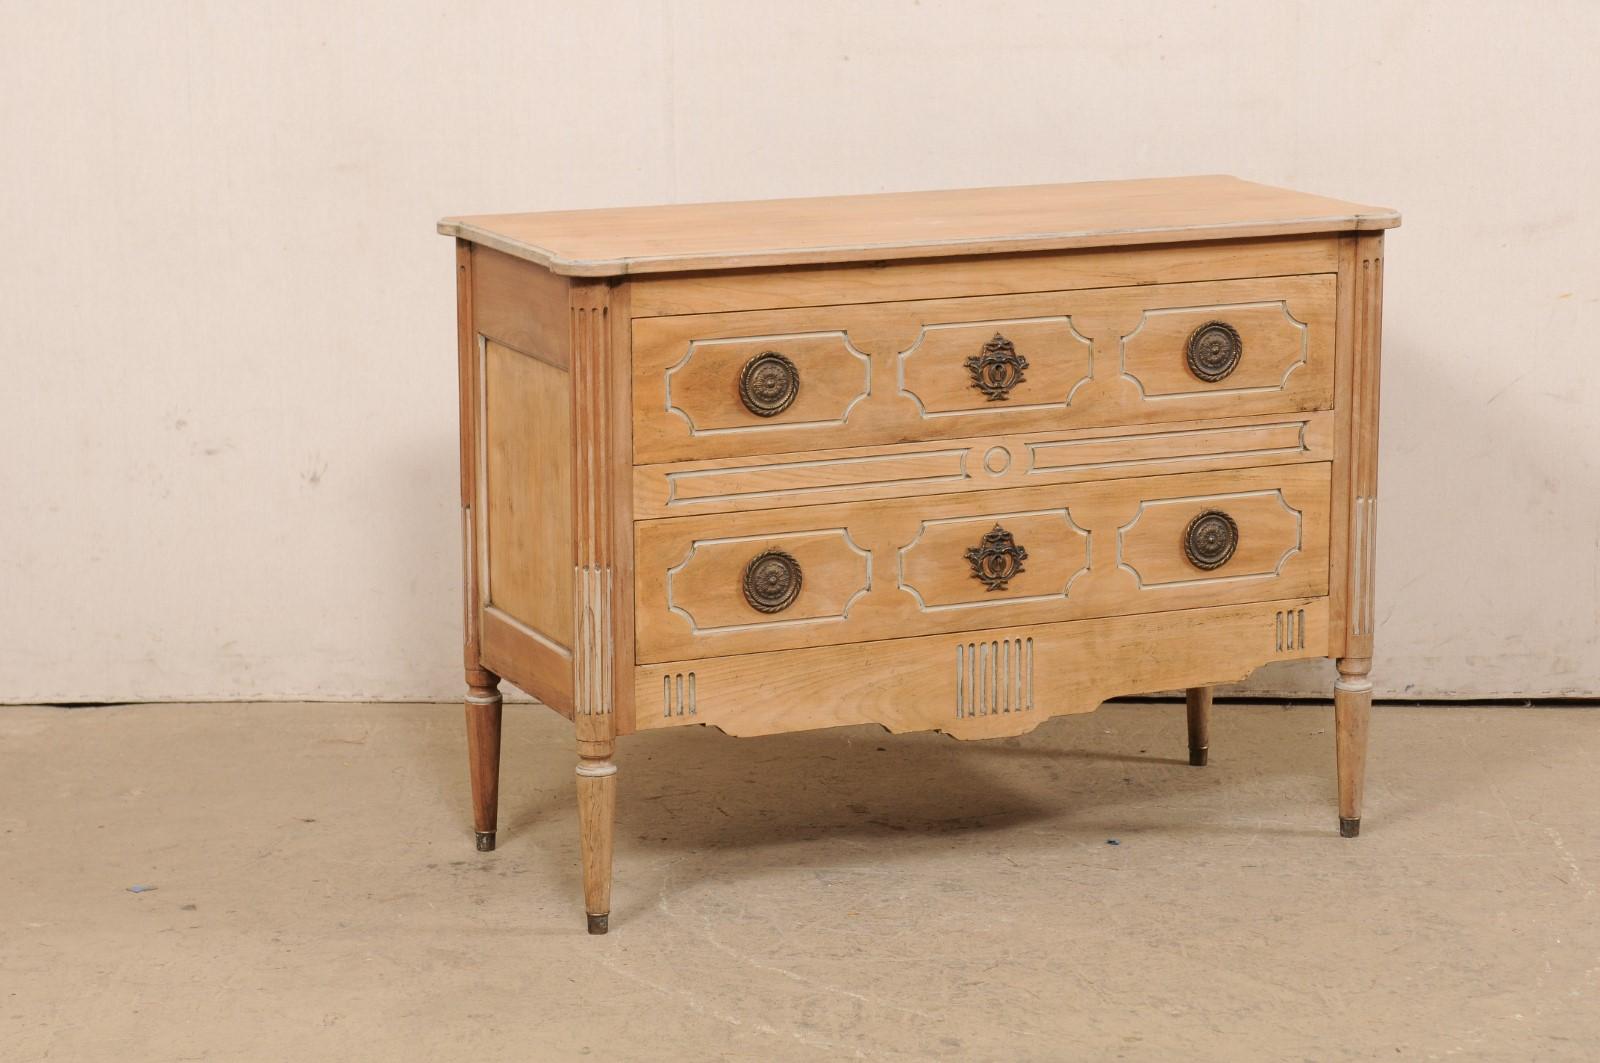 A French-style raised carved-wood chest of drawers. This vintage commode from American furniture maker 